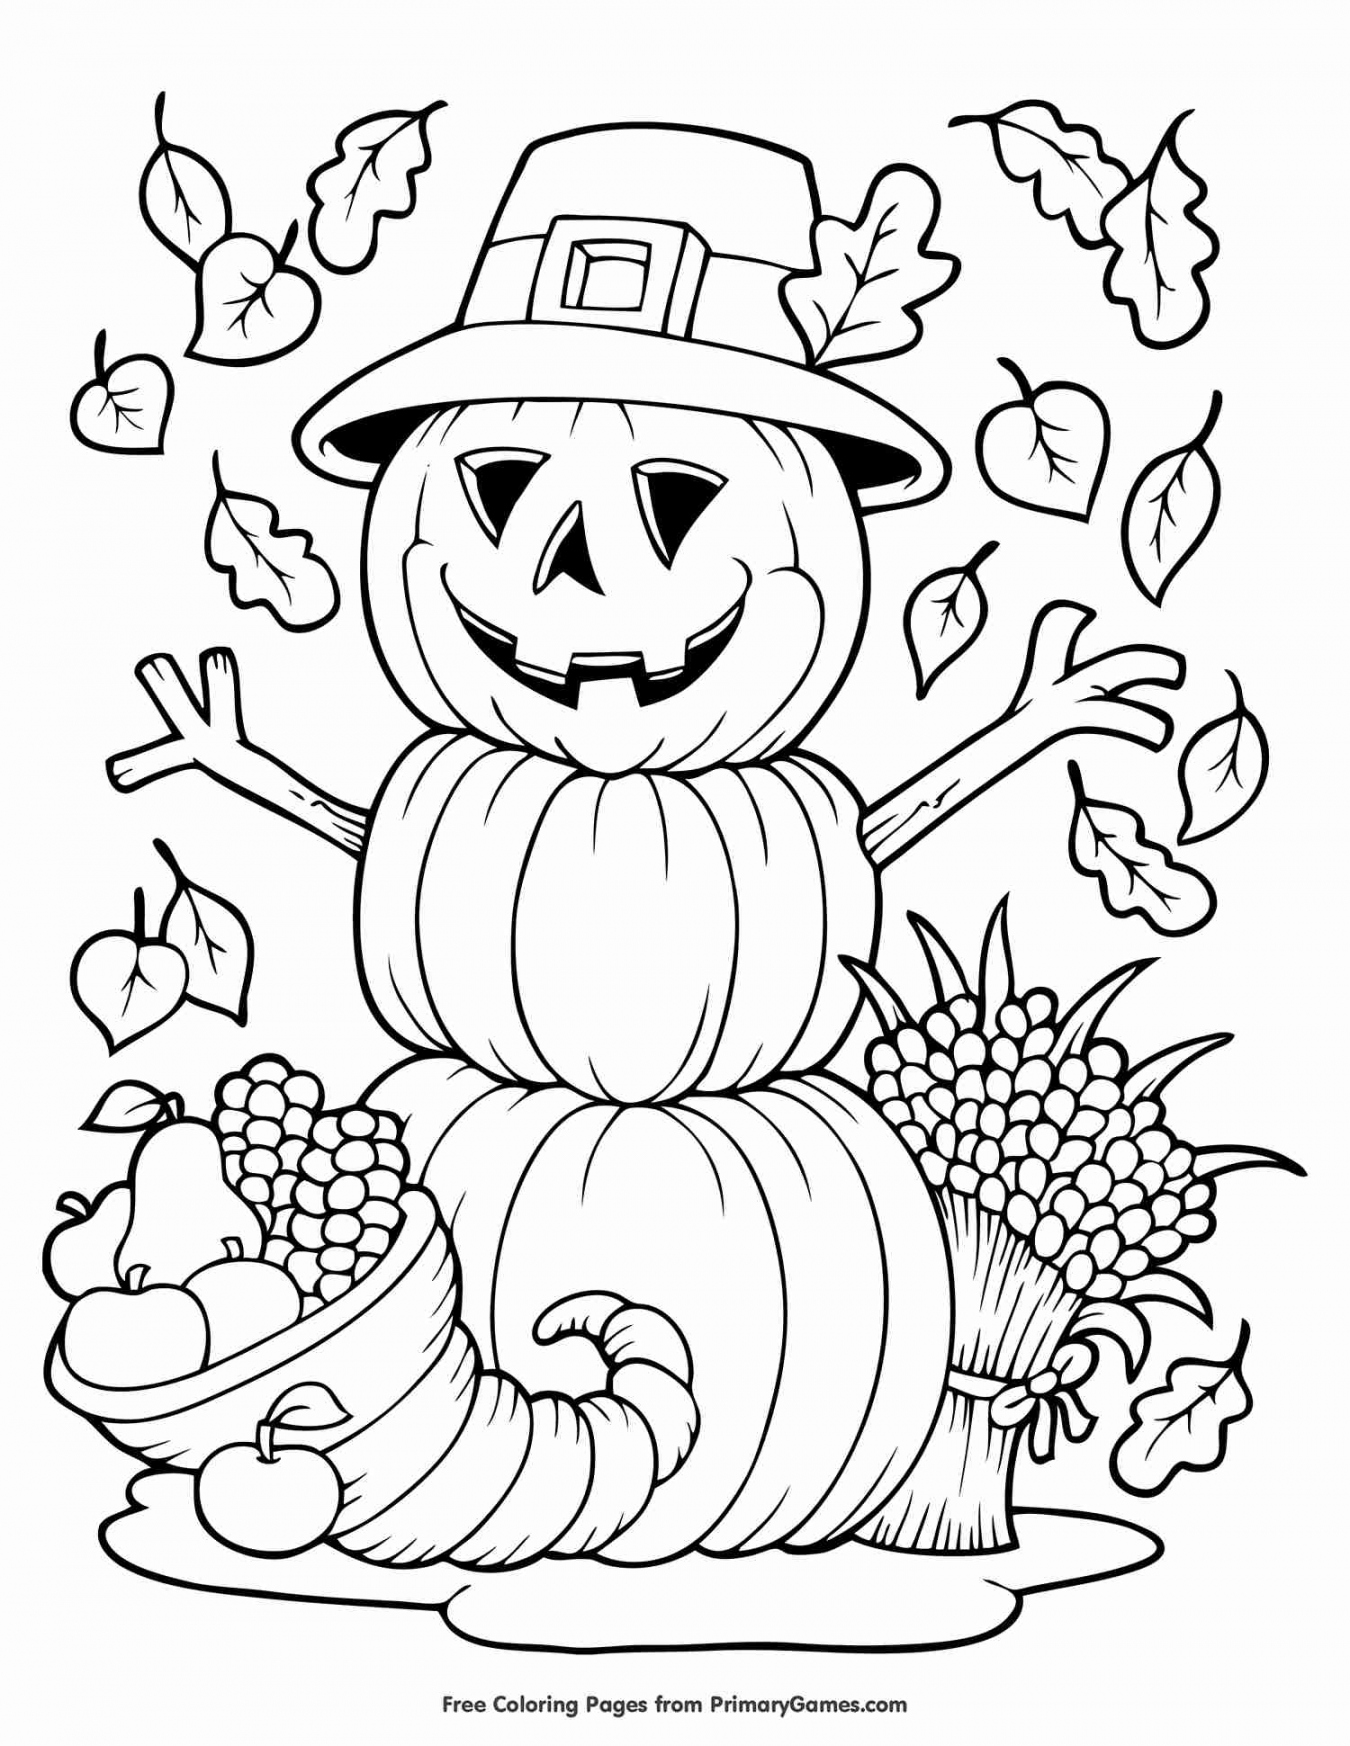 Free Printable Fall Coloring Pages - Printable -  Places to Find Free Autumn and Fall Coloring Pages